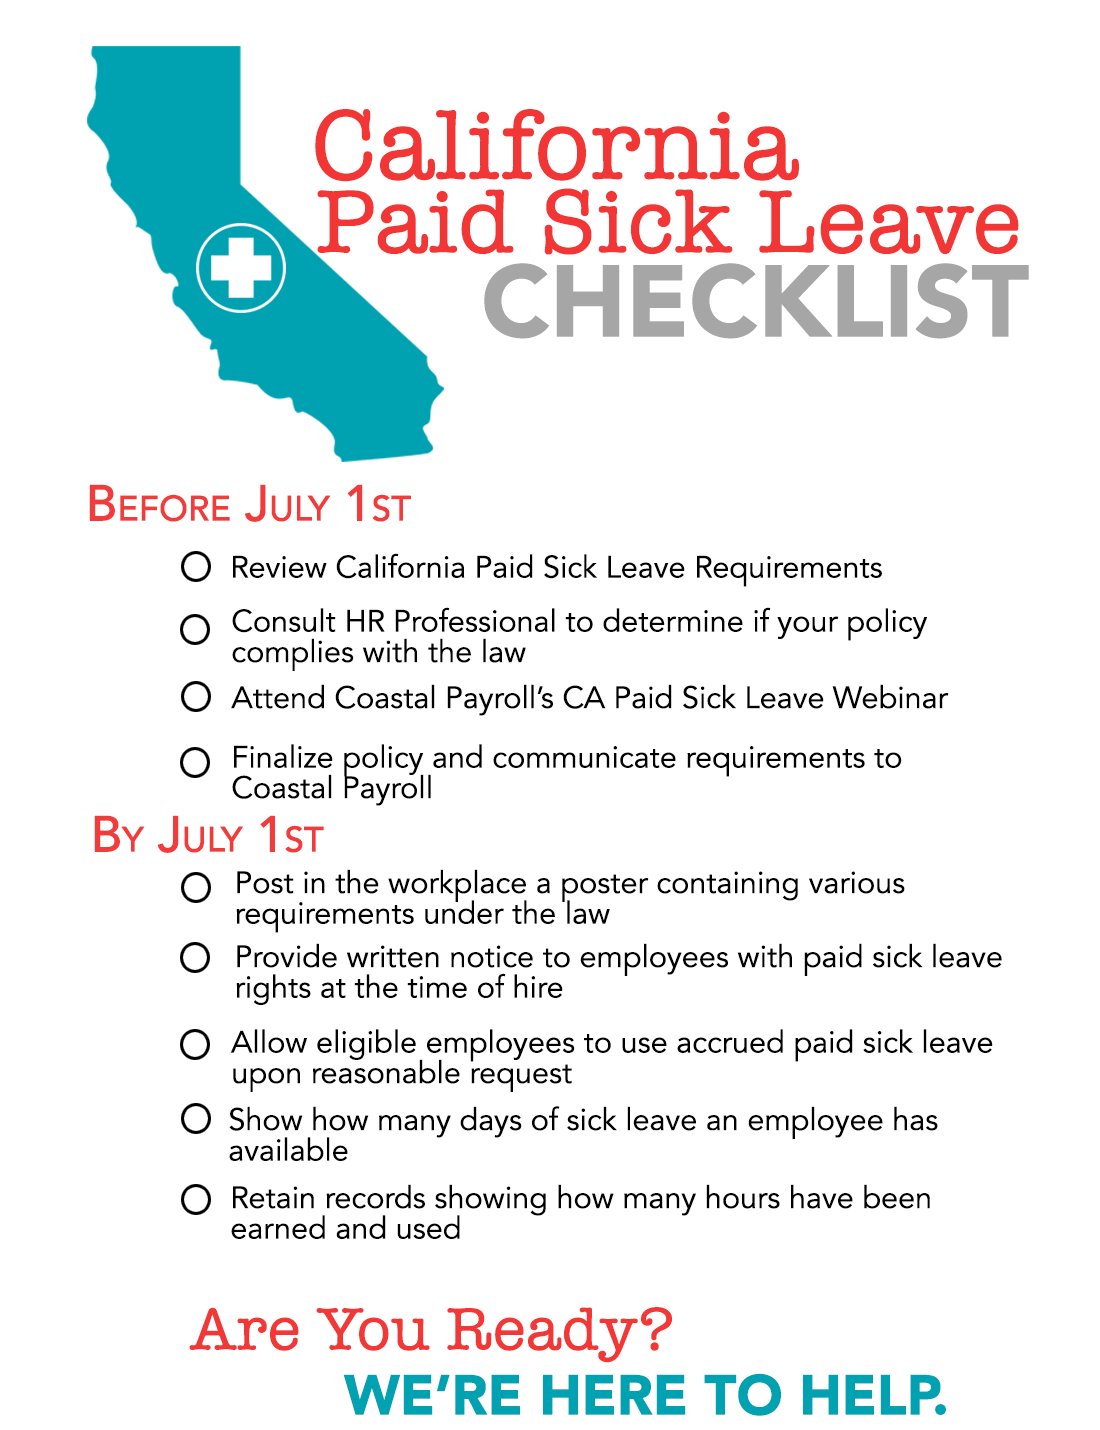 Are You Ready? CA Paid Sick Leave Checklist